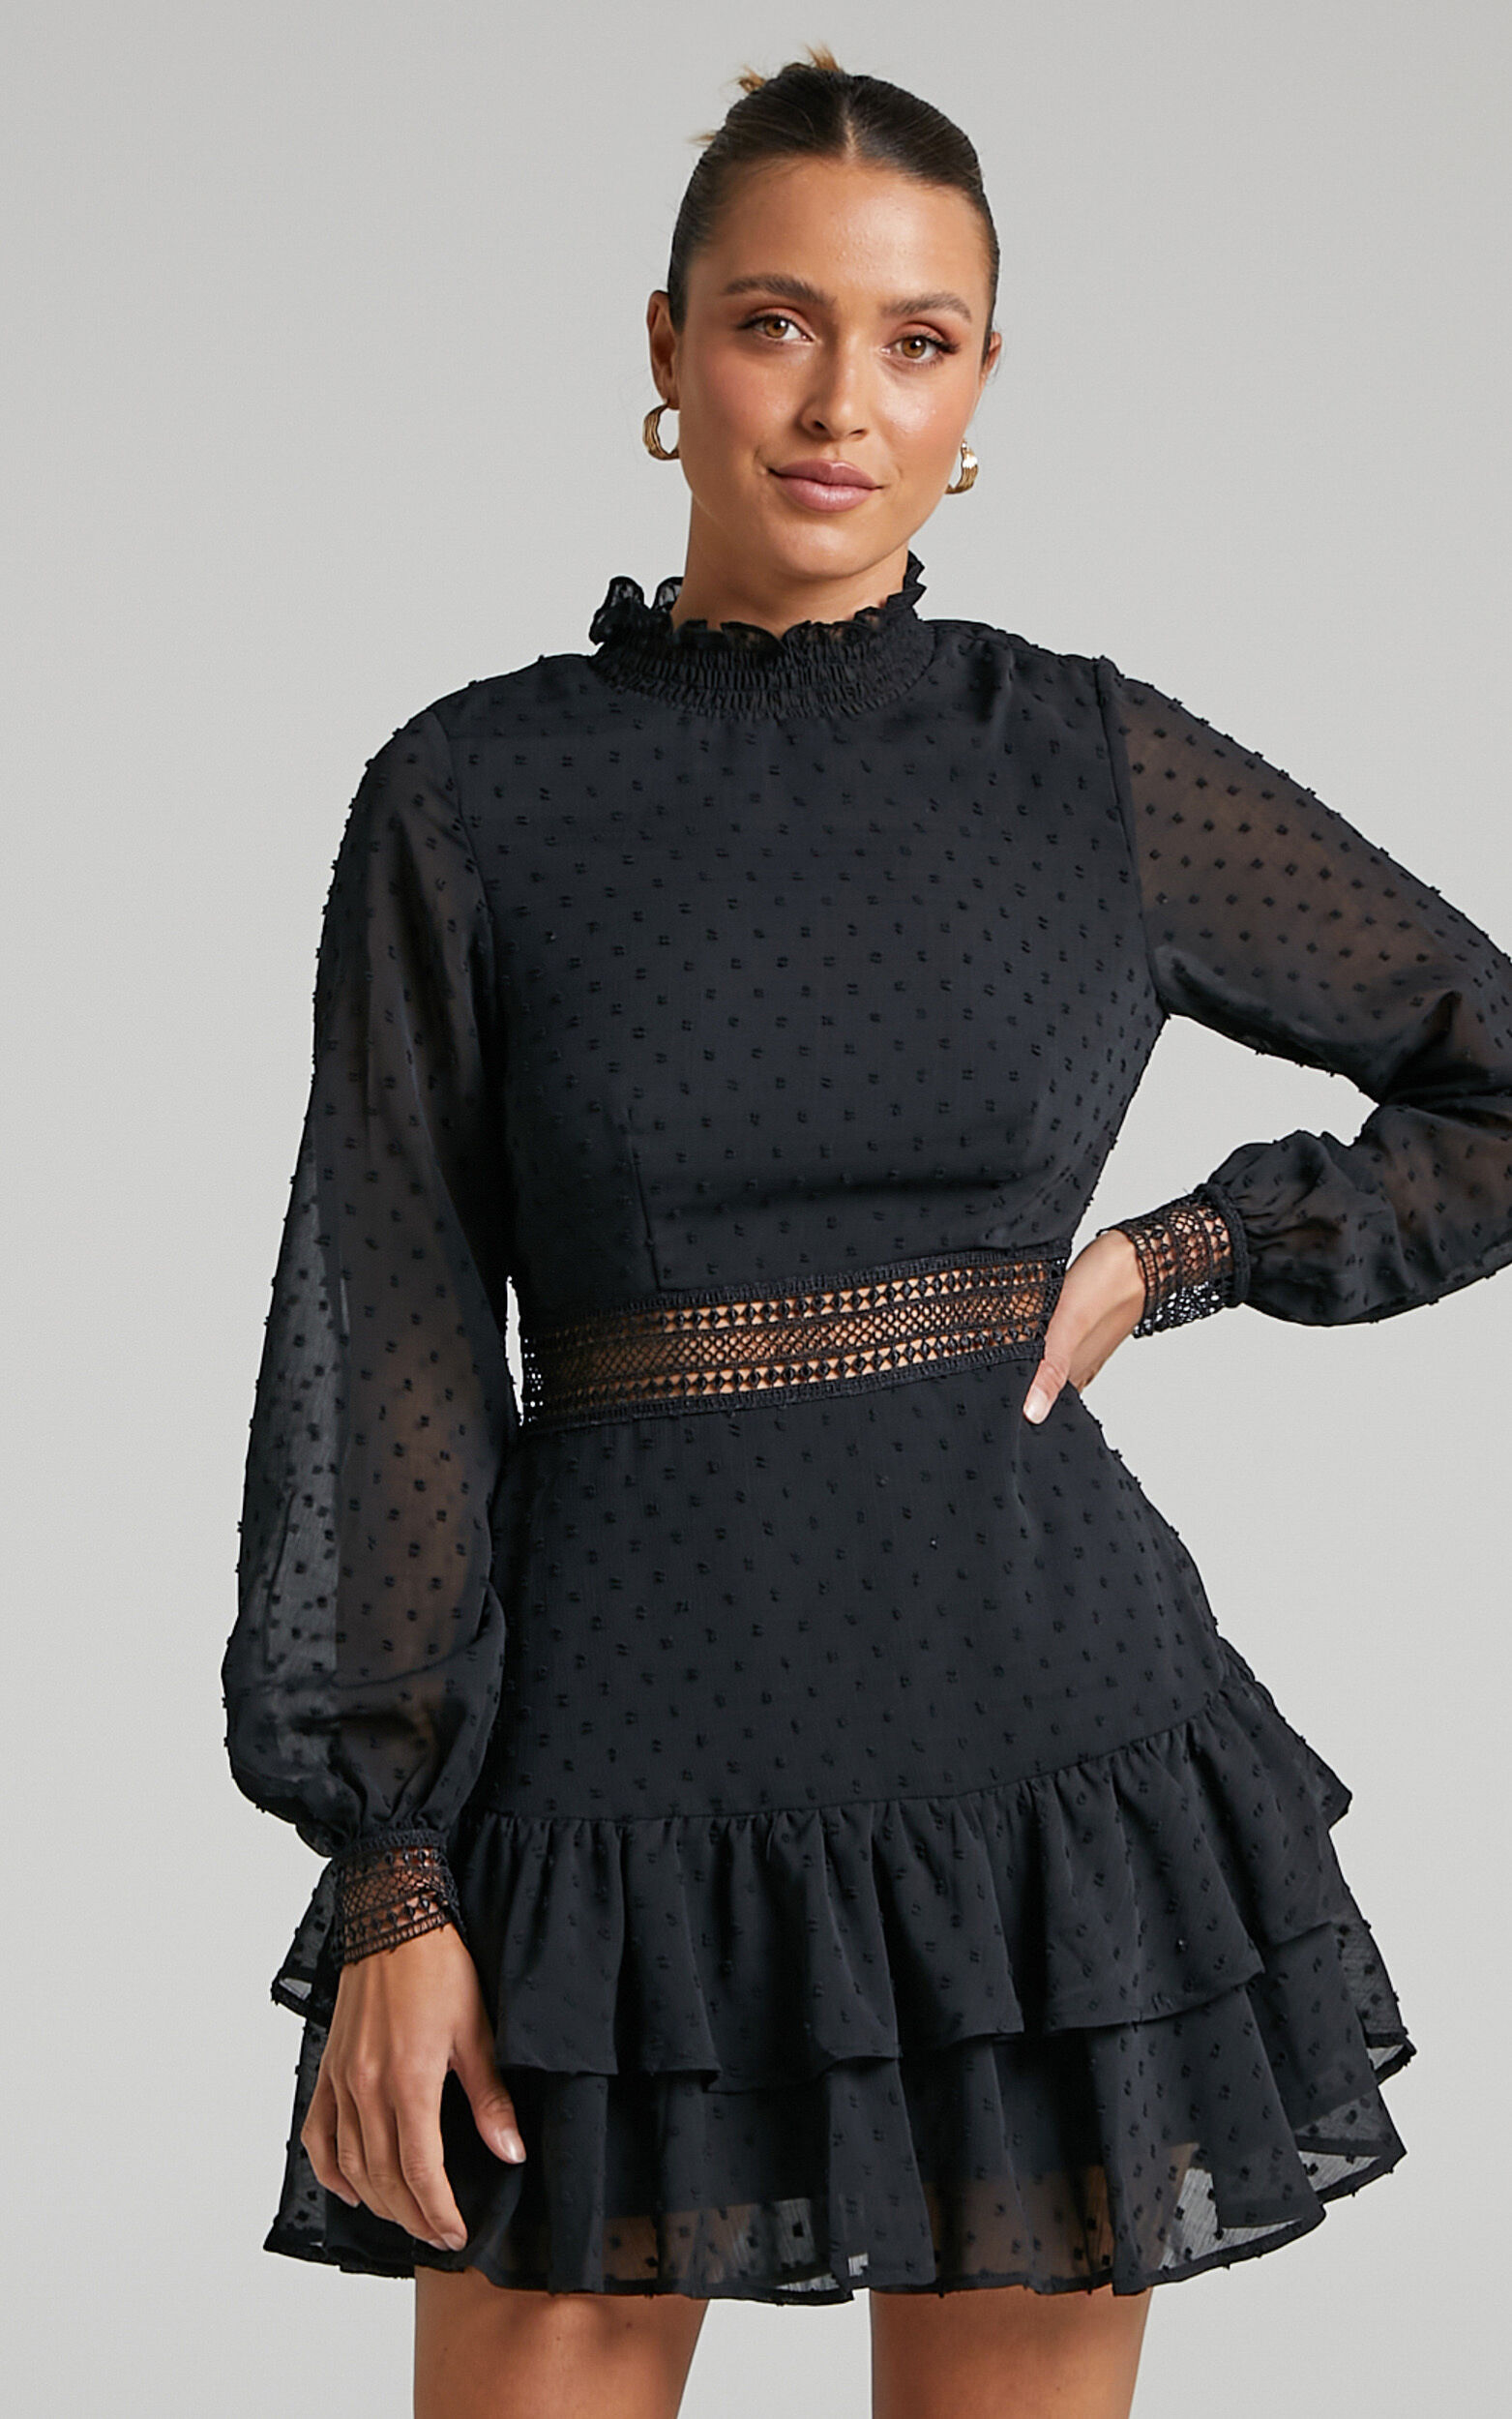 Are You Gonna Kiss Me Long Sleeve Mini Dress in Black - 20, BLK3, super-hi-res image number null